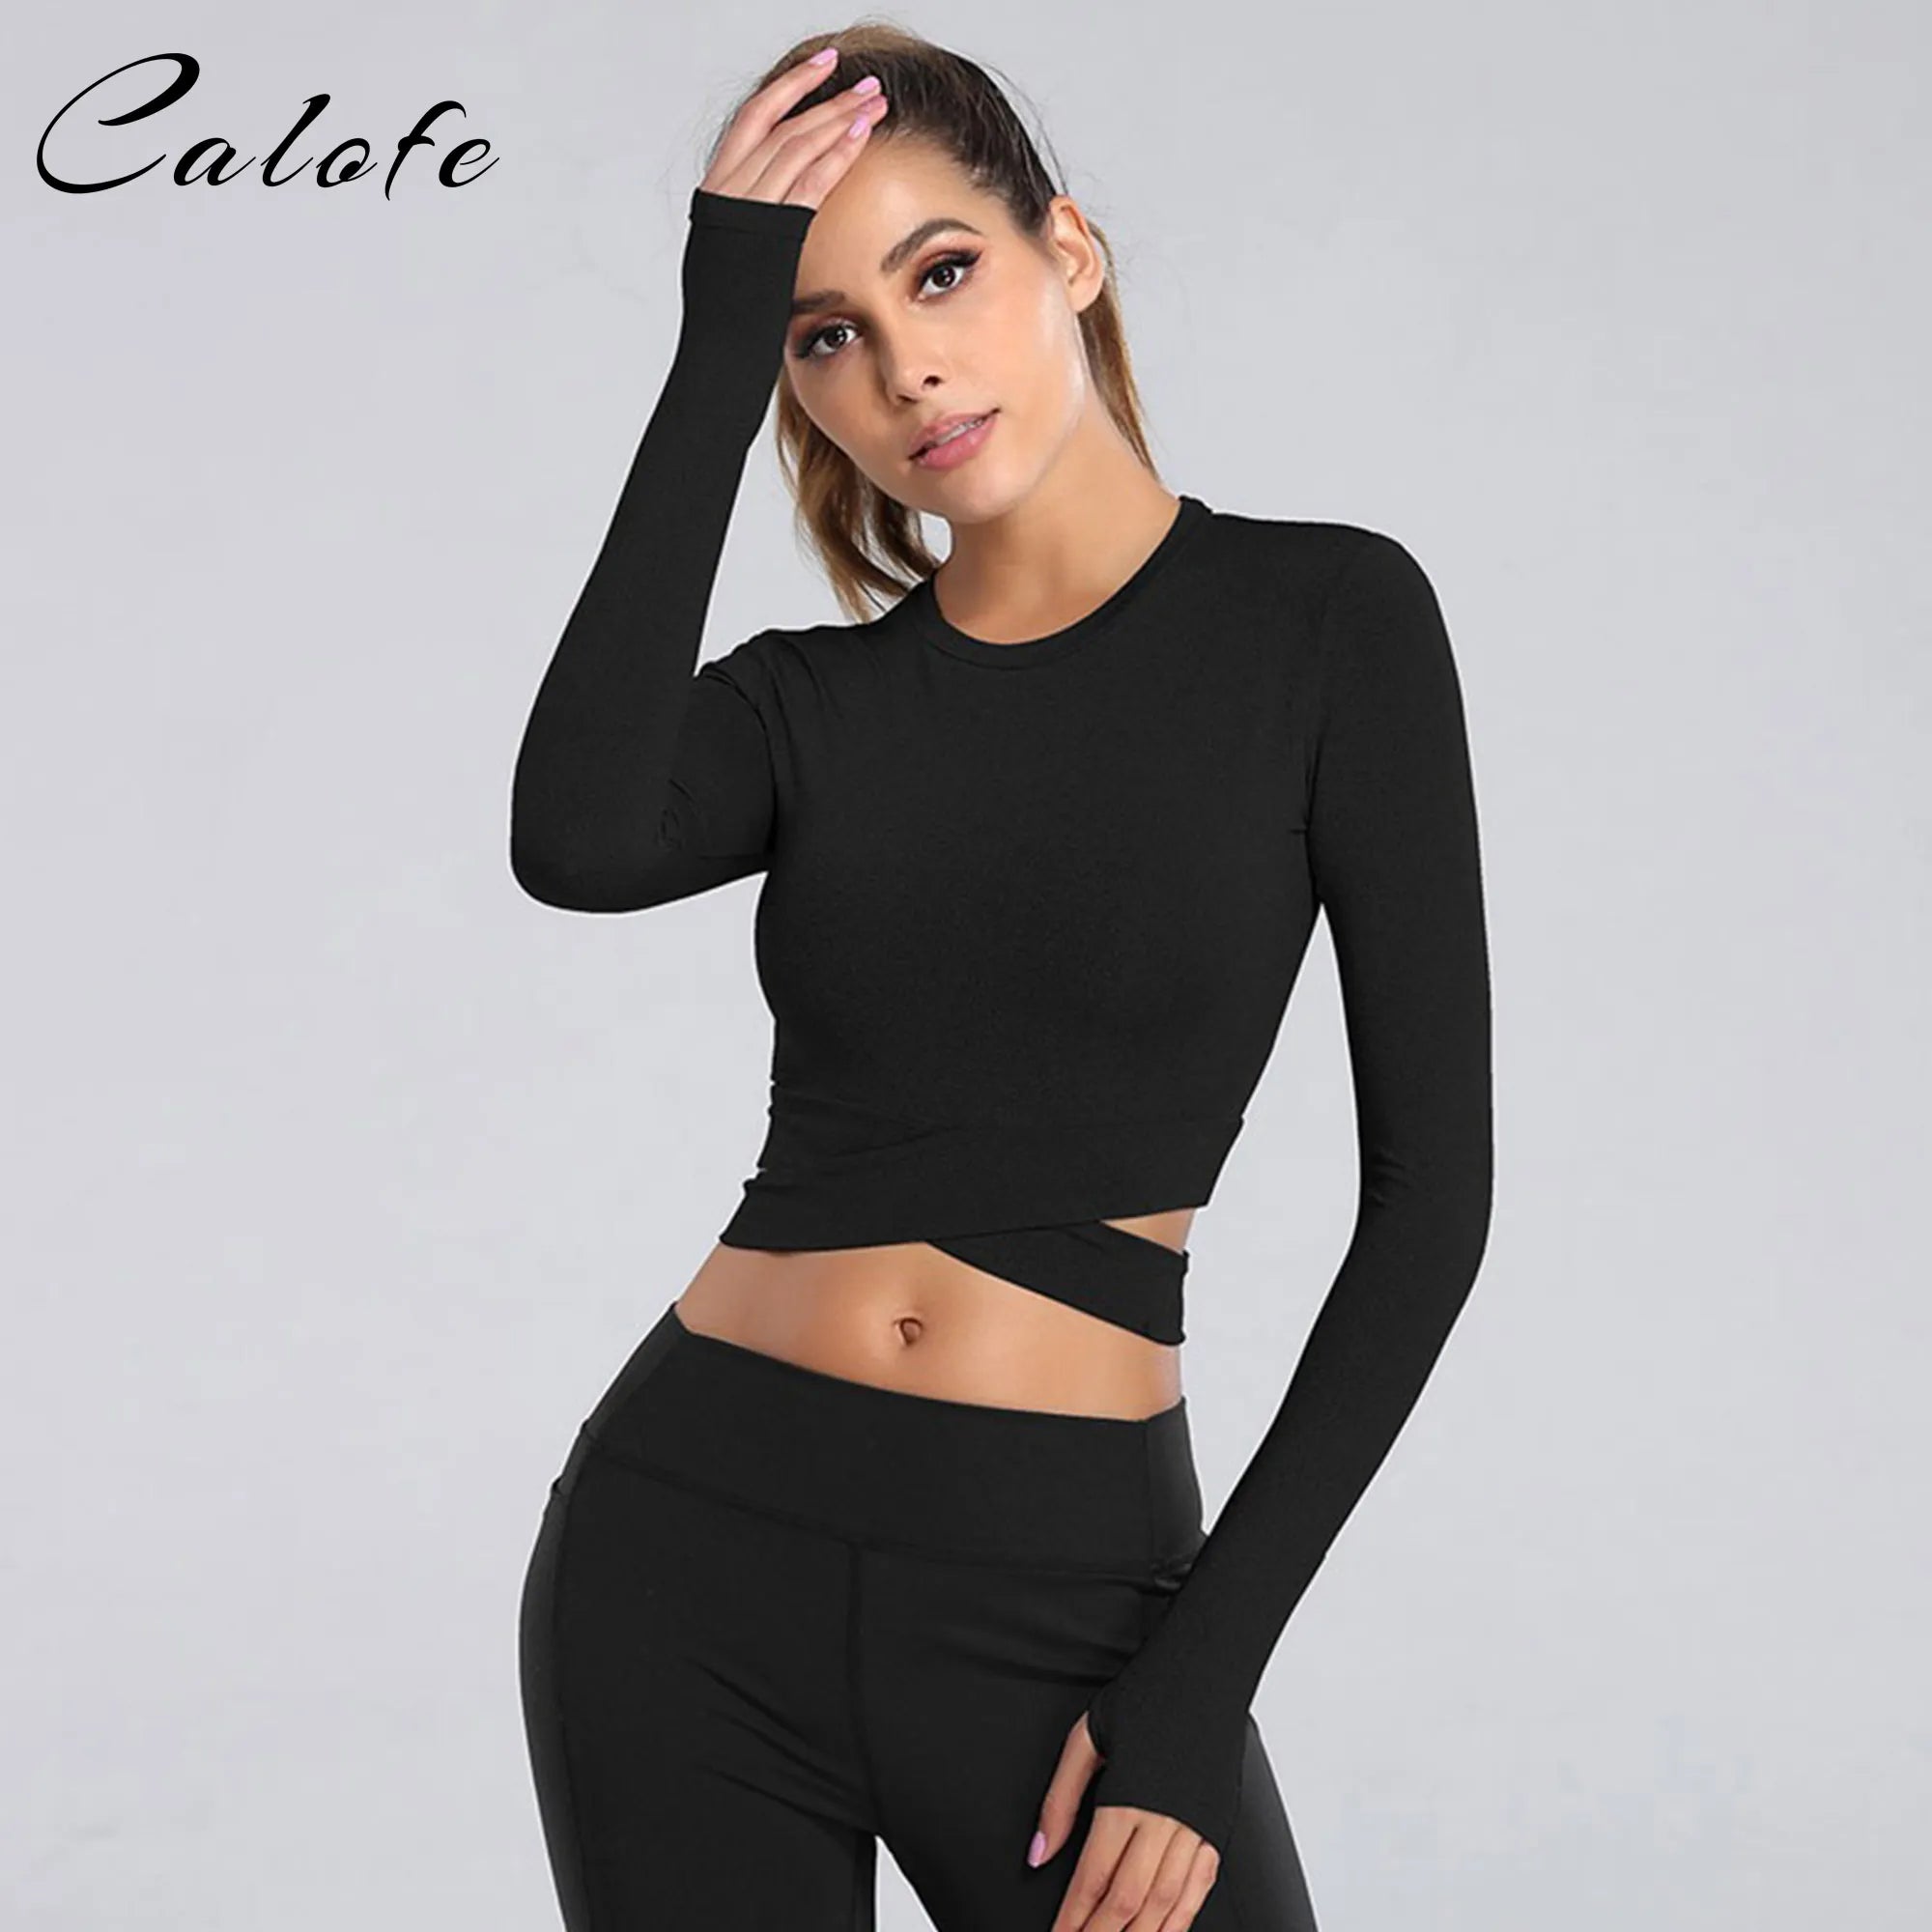 Sports Crop top Women fitness gym clothing